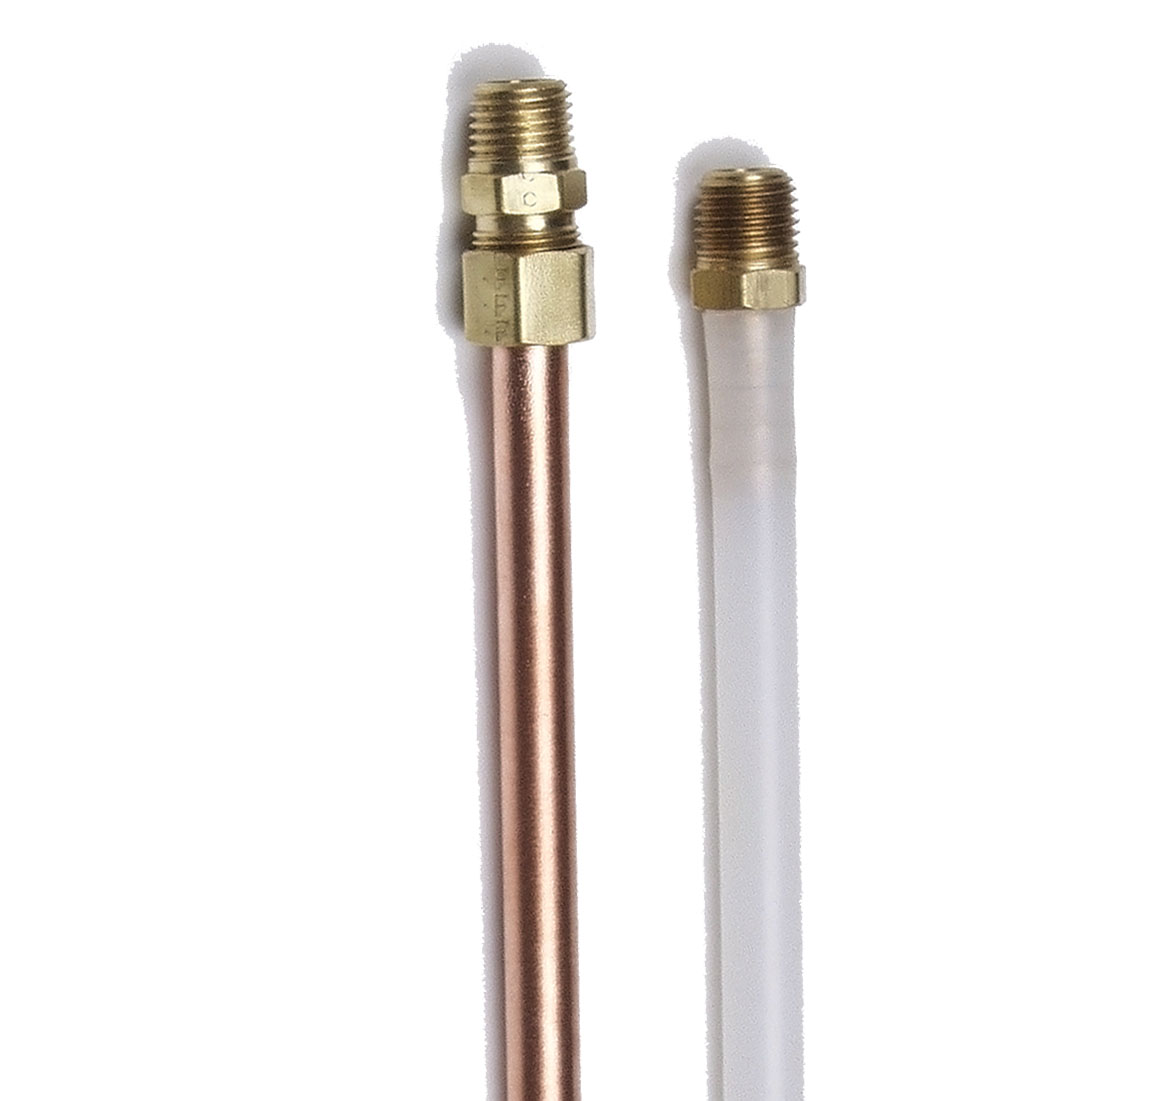 Dip Tubes and Syphon Tubes